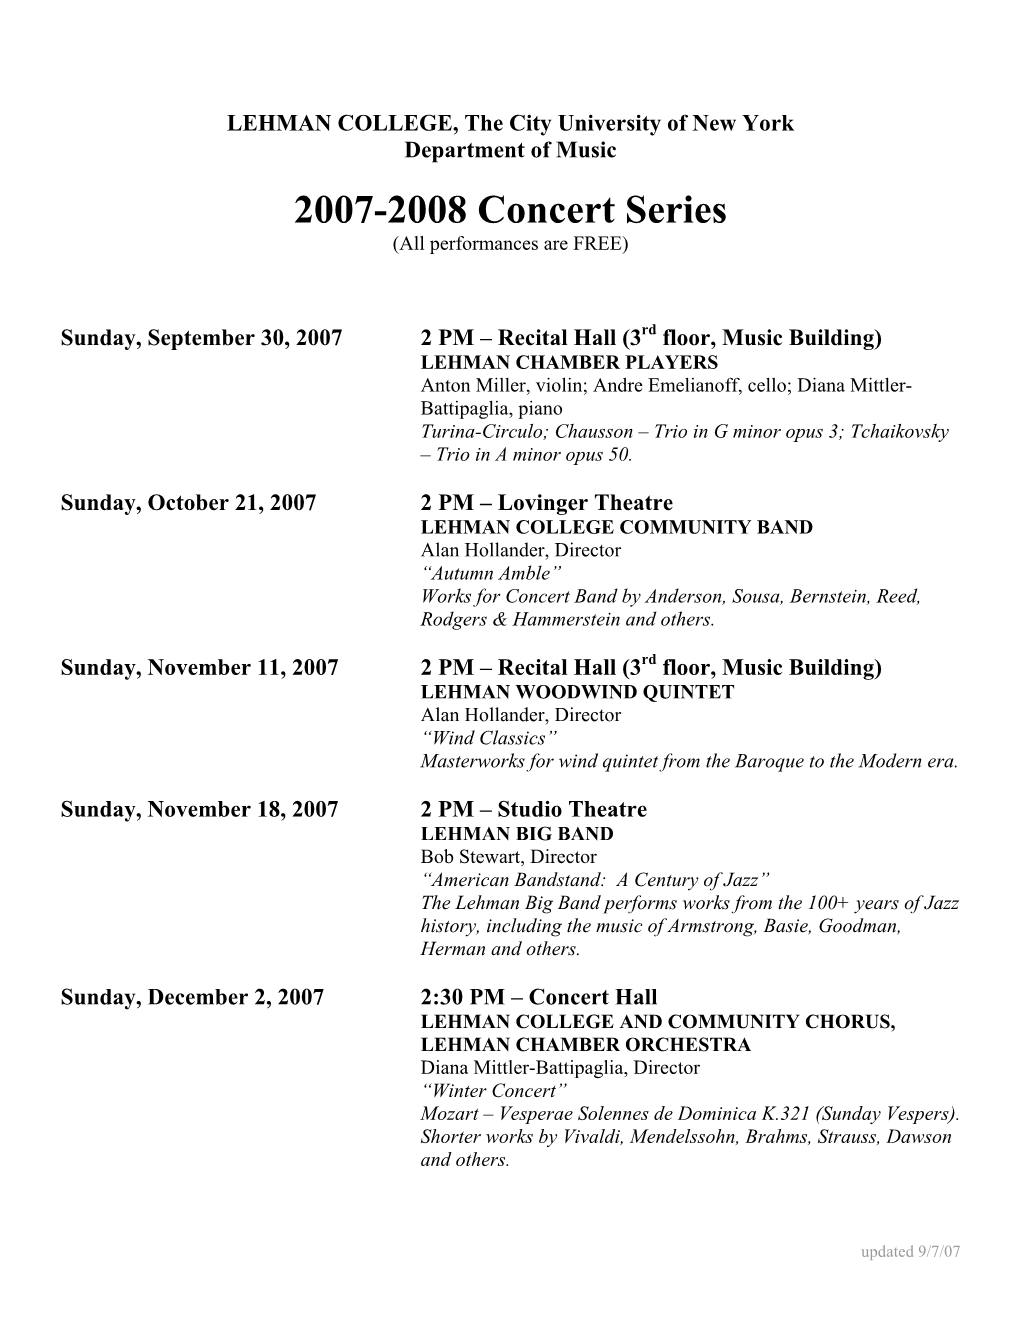 2007-2008 Concert Series (All Performances Are FREE)